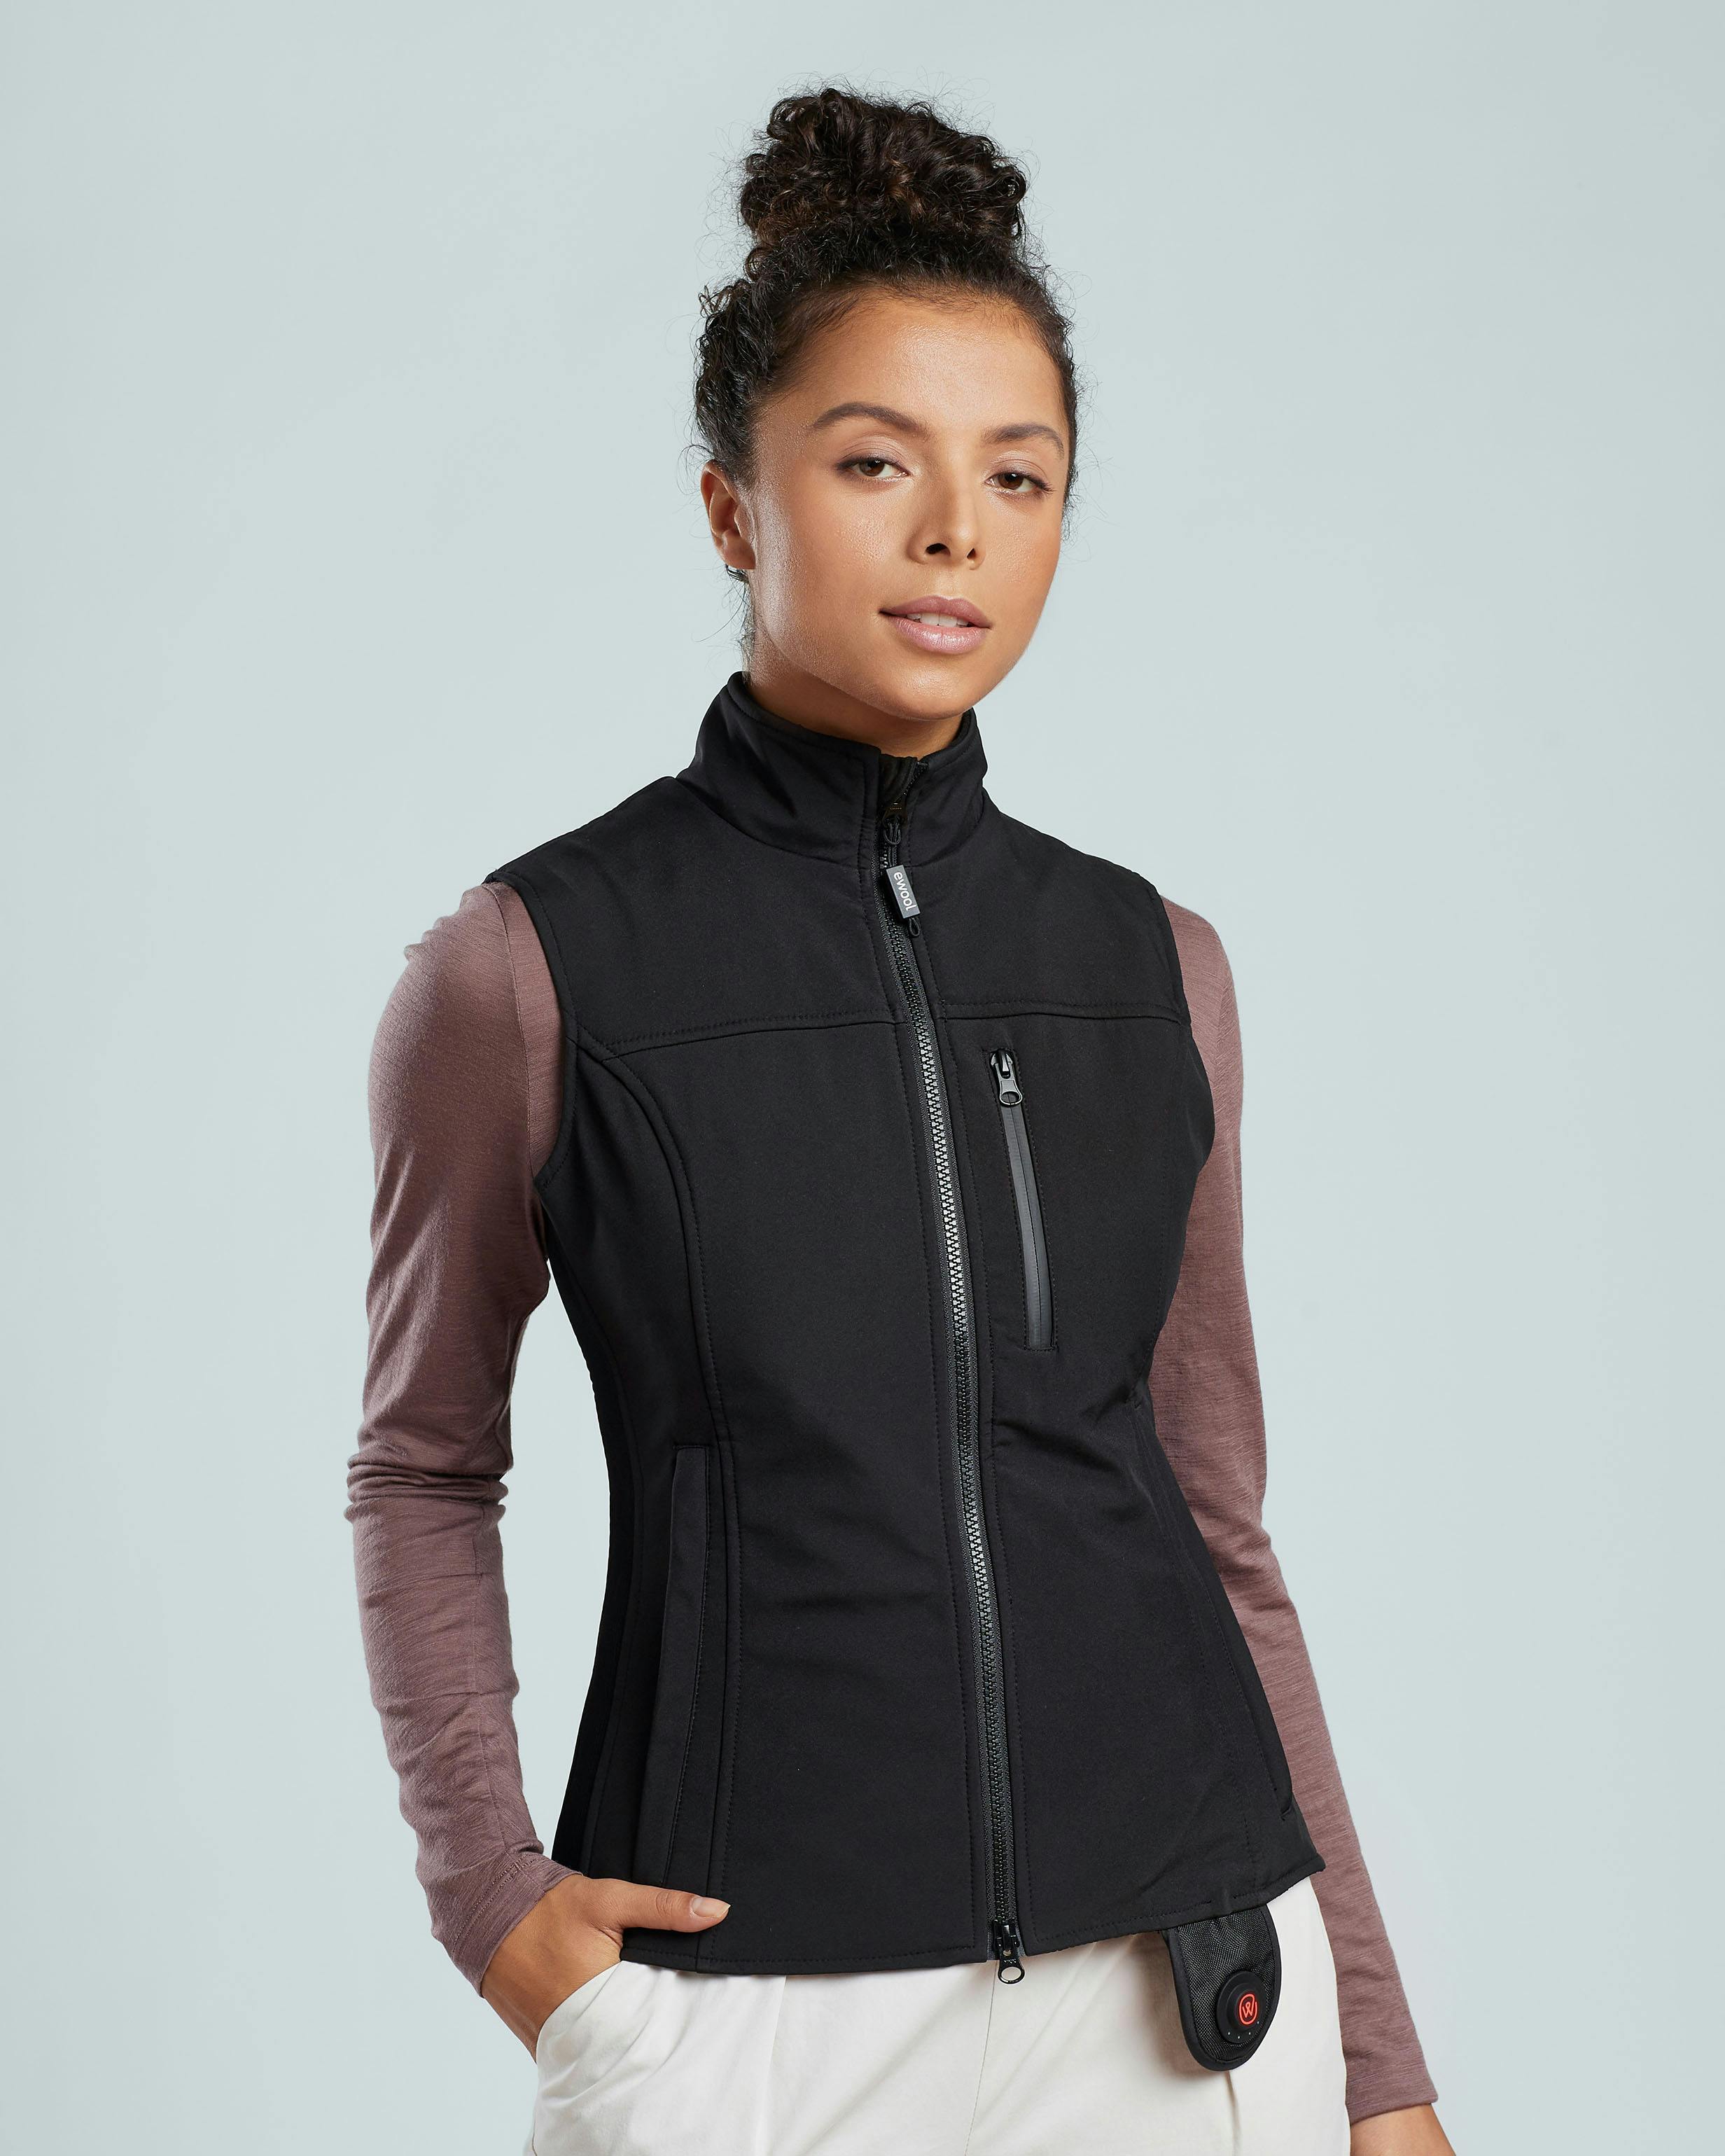 ewool Pro+ Heated Vest- The technology and gadgets for women